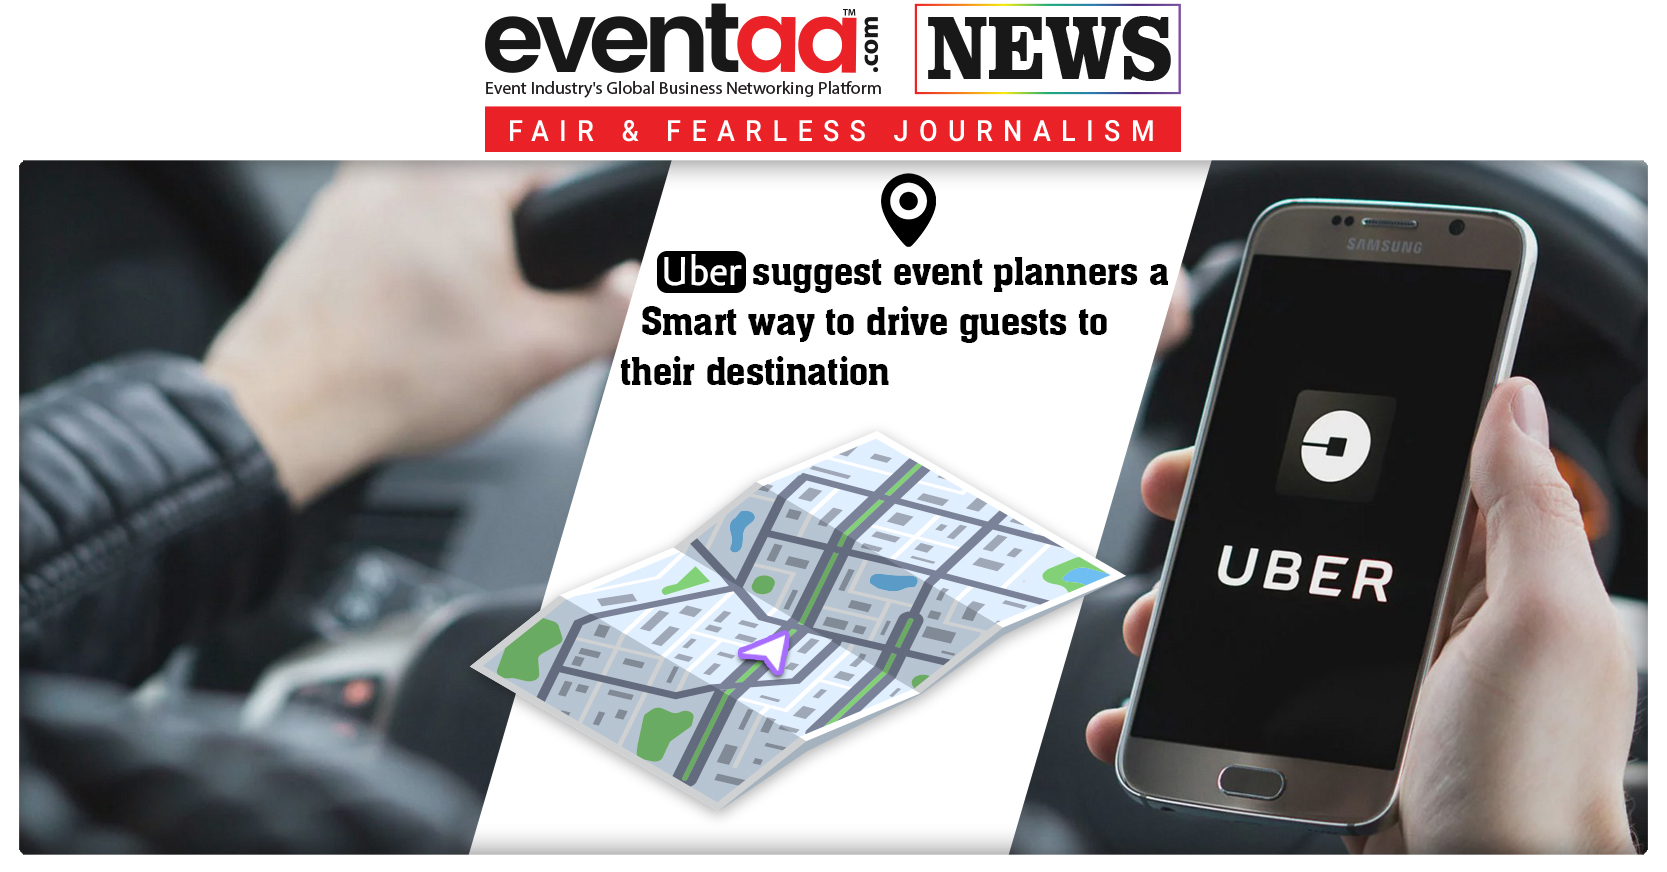 Uber Suggest Event Planners a Smart Way to Drive Guests to Their Destination